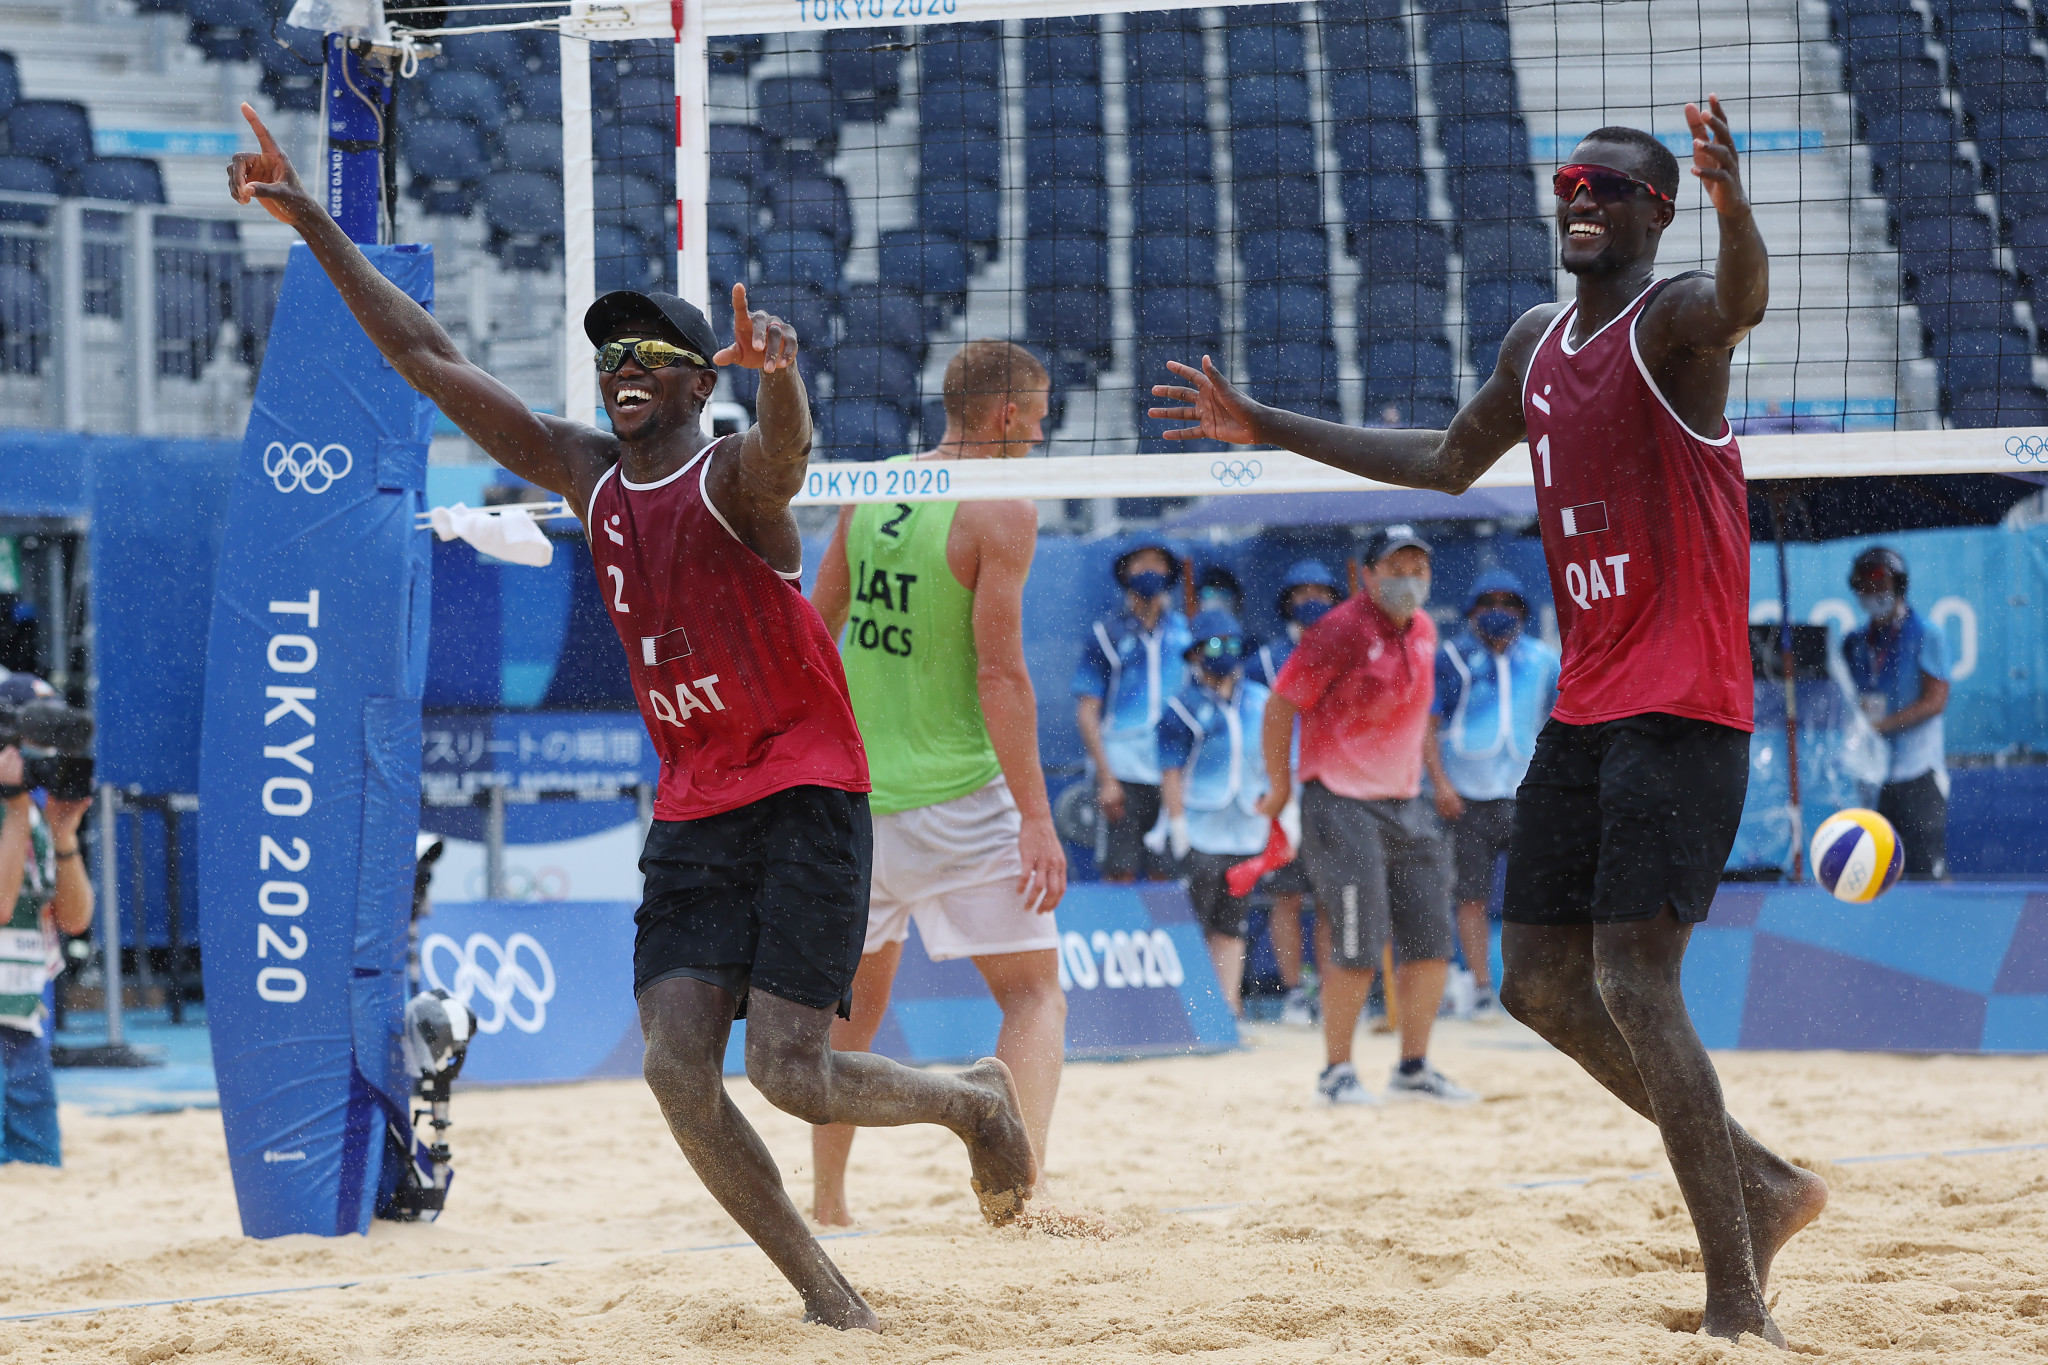 Ahmed Tijan and Cherif Younousse of Team Qatar beat Poland's Michal Bryl and Bartosz Losiak to reach the Volleyball World Beach Pro Tour finals ©Getty Images 